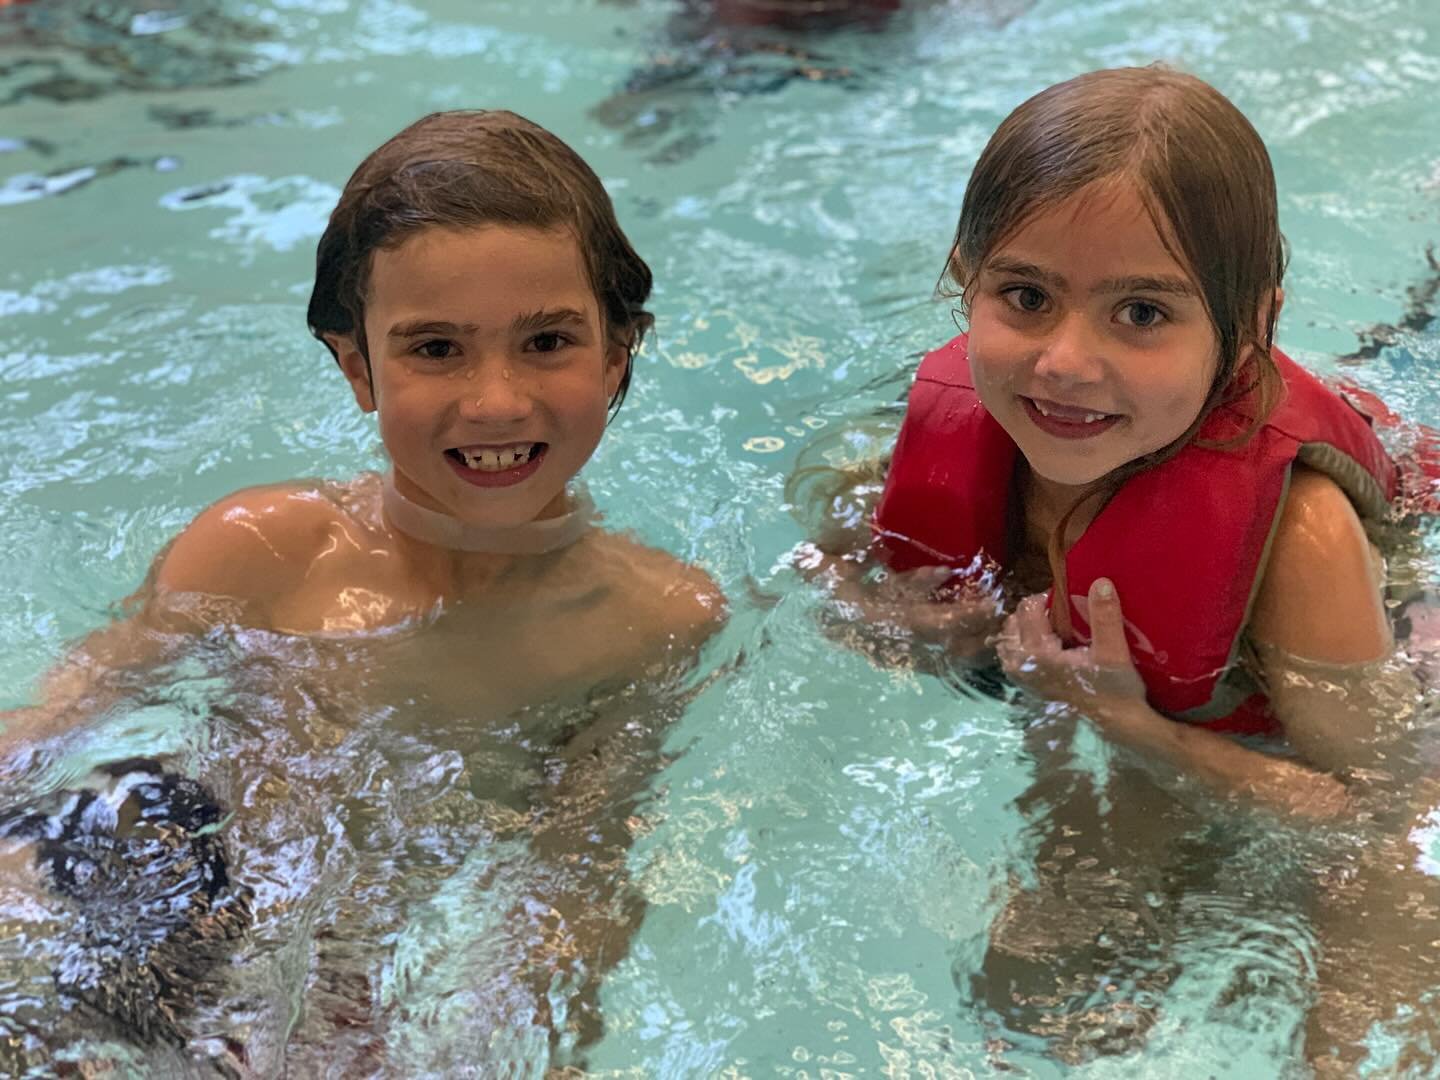 Is your child all smiles when it comes to the water?!💧 

Register now and set them on the road to CONFIDENCE! 
speerswimschool.com

#swimlessons #watersafety #registernow #delcoswims #chescoswims #montcoswims #mainlineswim #learntoswim #speerswimsch